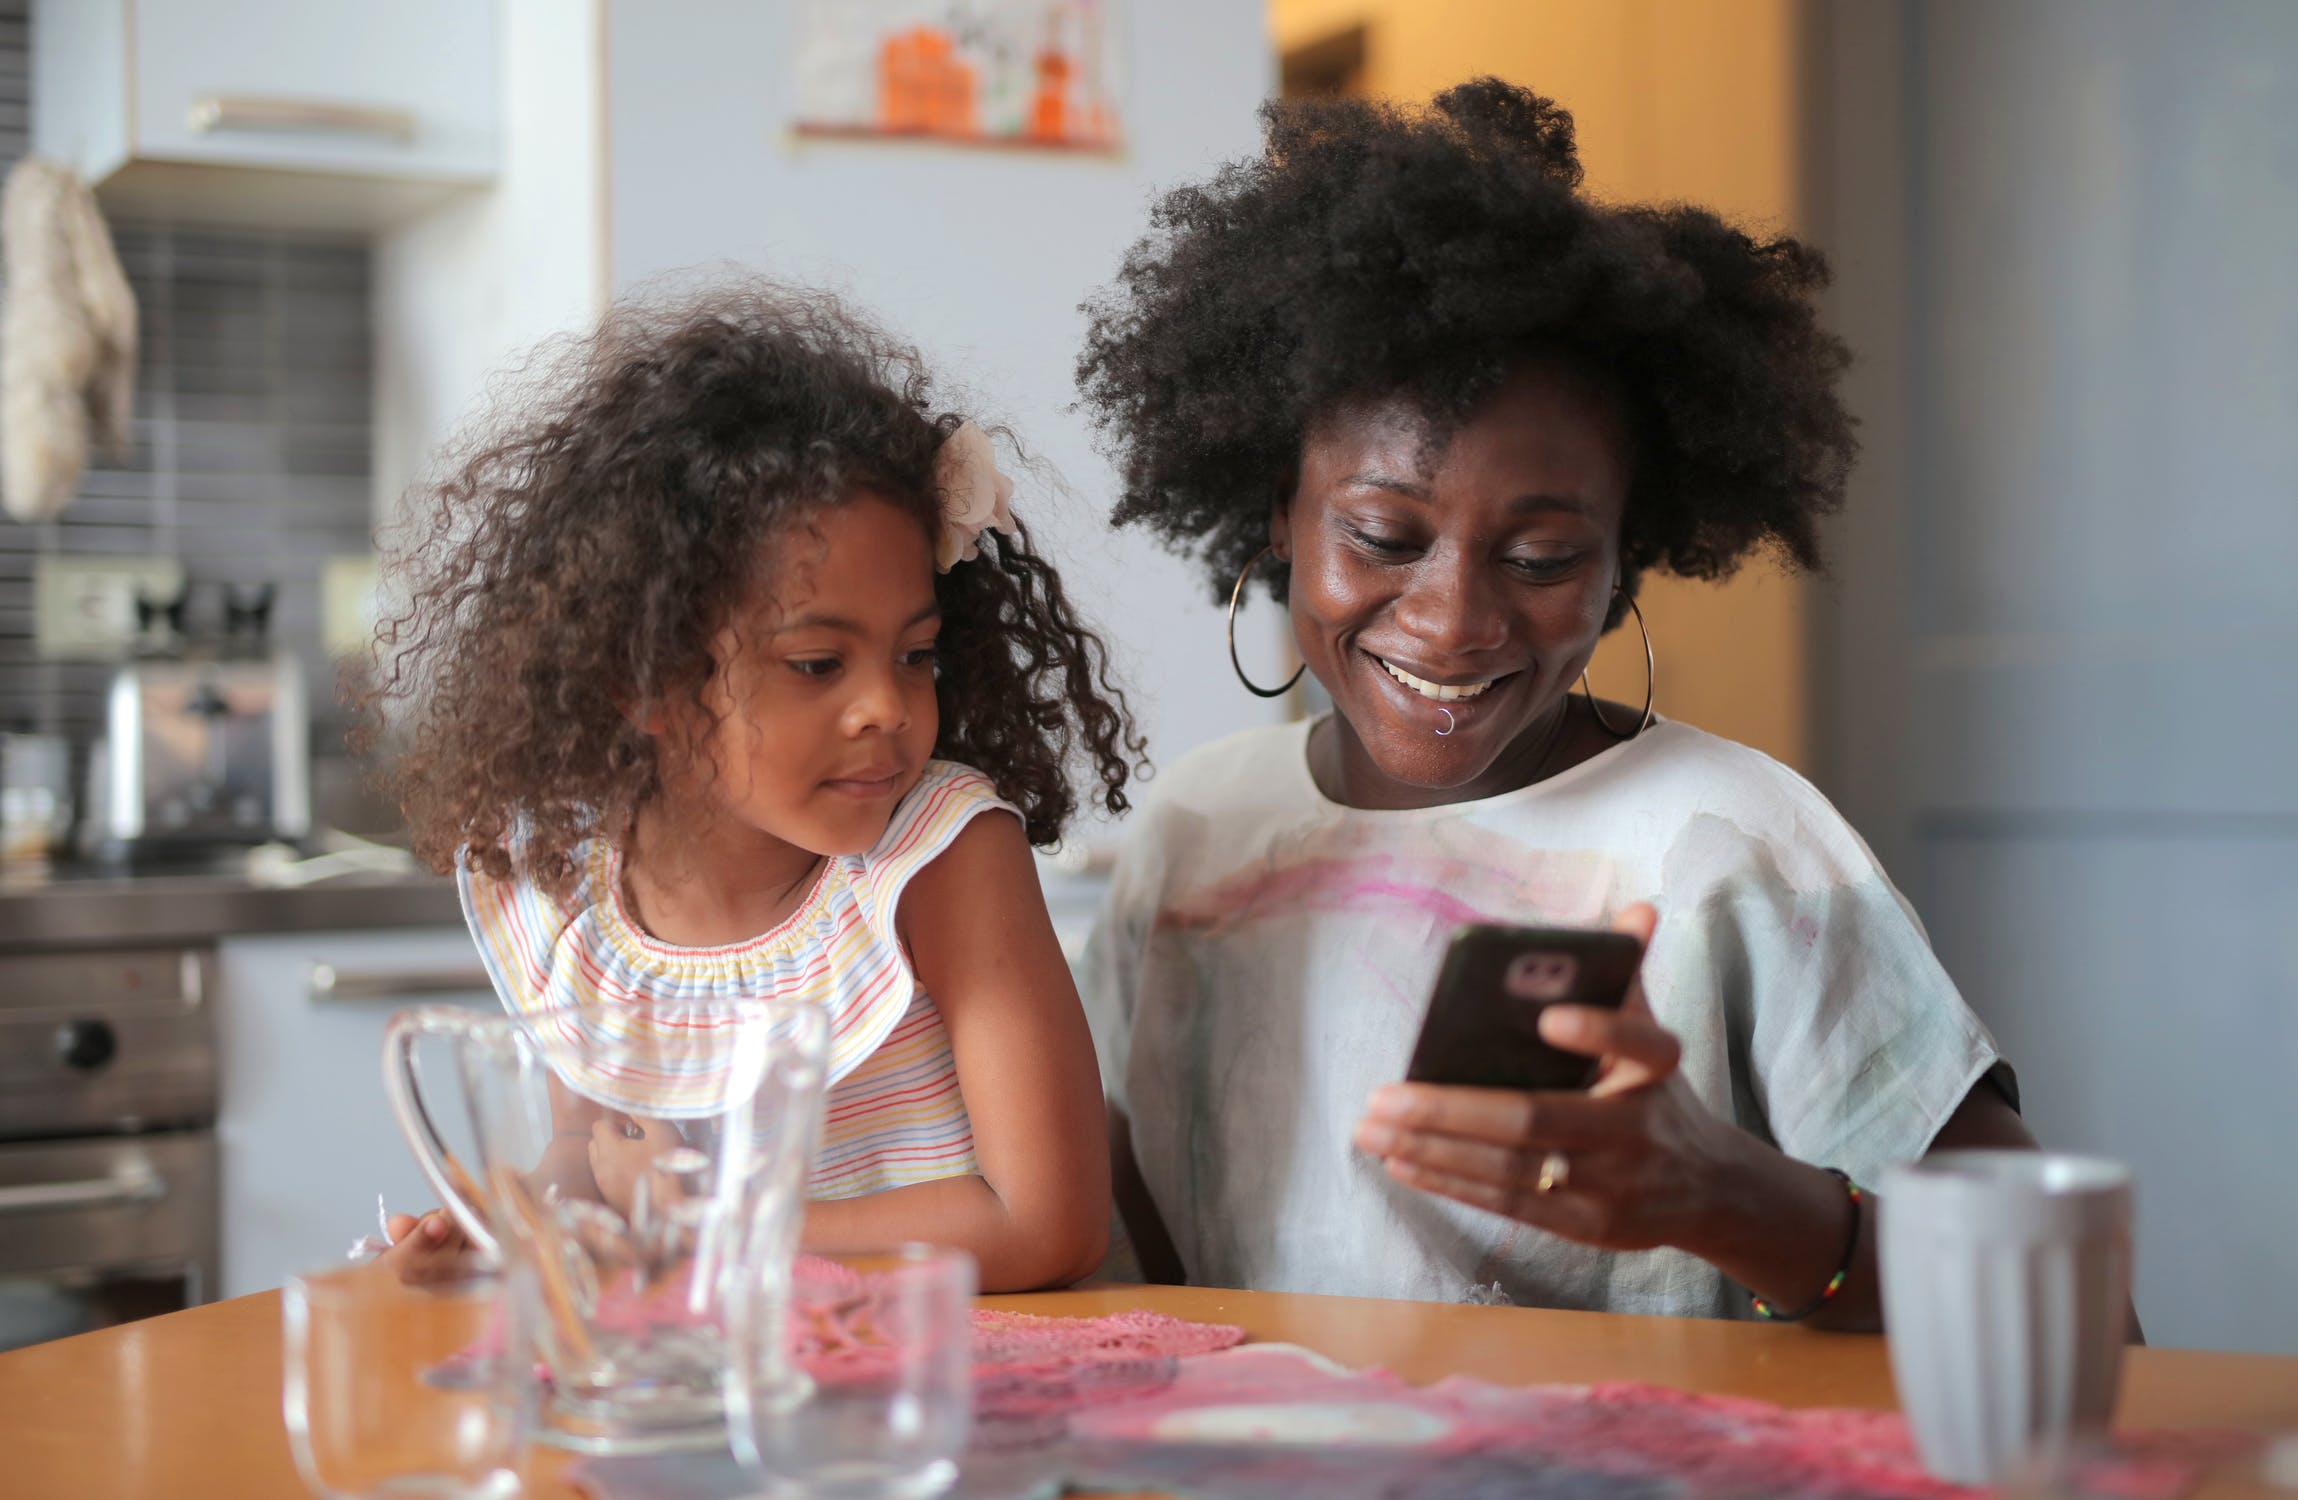 This Online Platform Helps Black Families Locate Culturally Relevant Childcare Providers